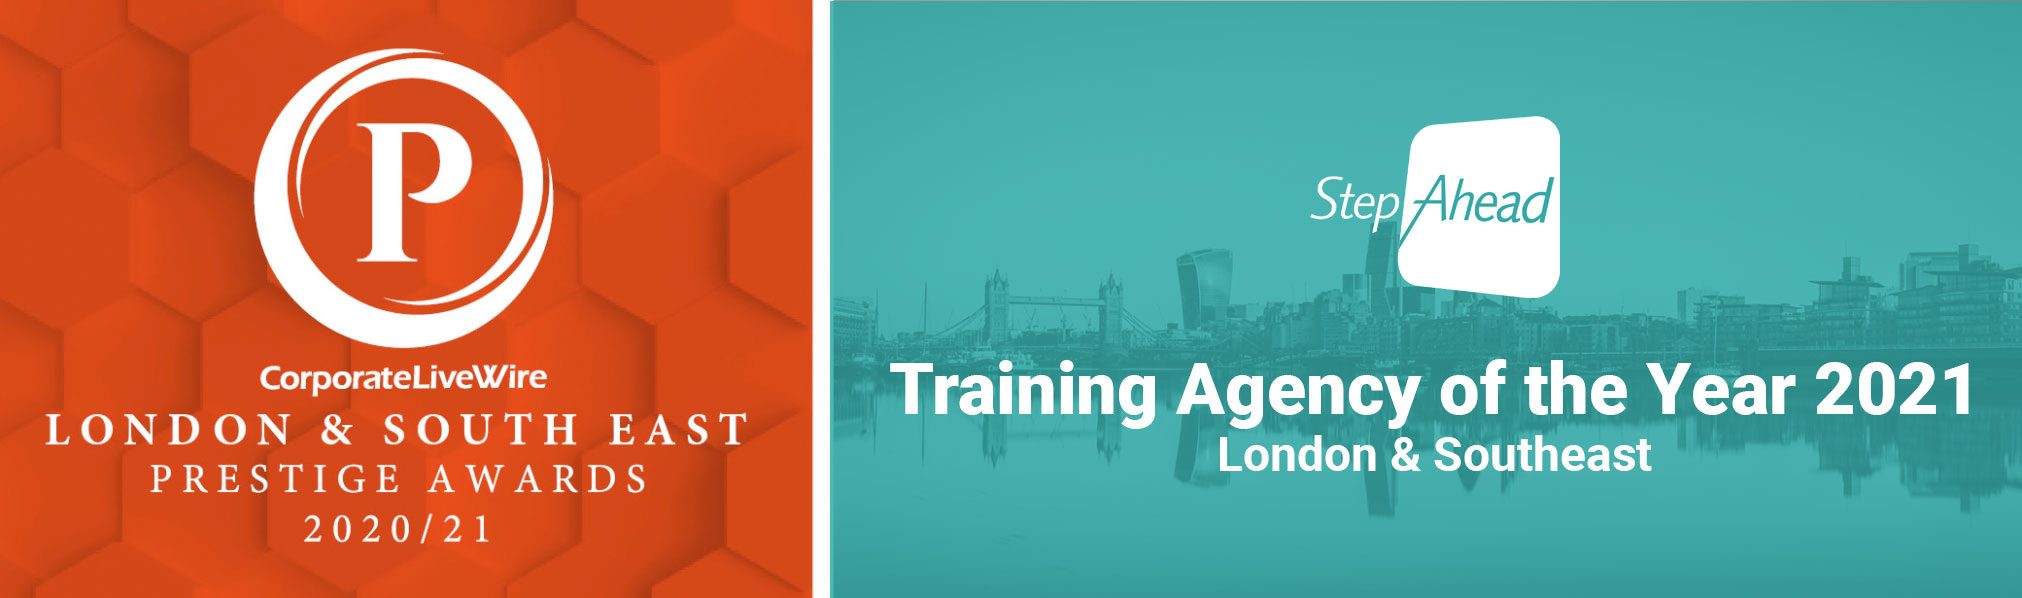 London Training Agency of the Year